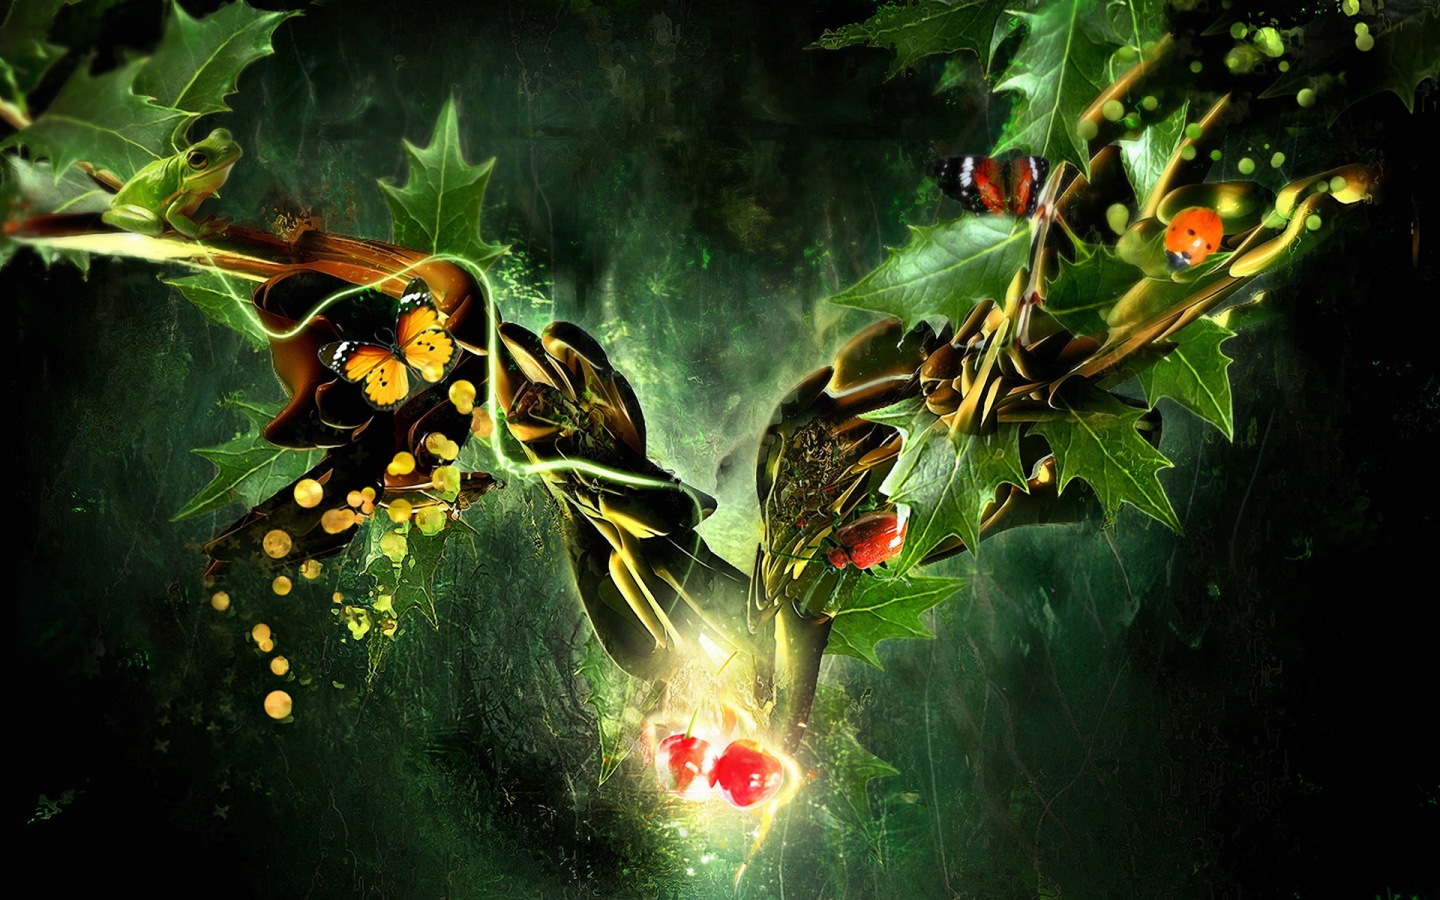 Butterfly, Ladybug, Frog in a Fantasy World for 1440 x 900 widescreen resolution